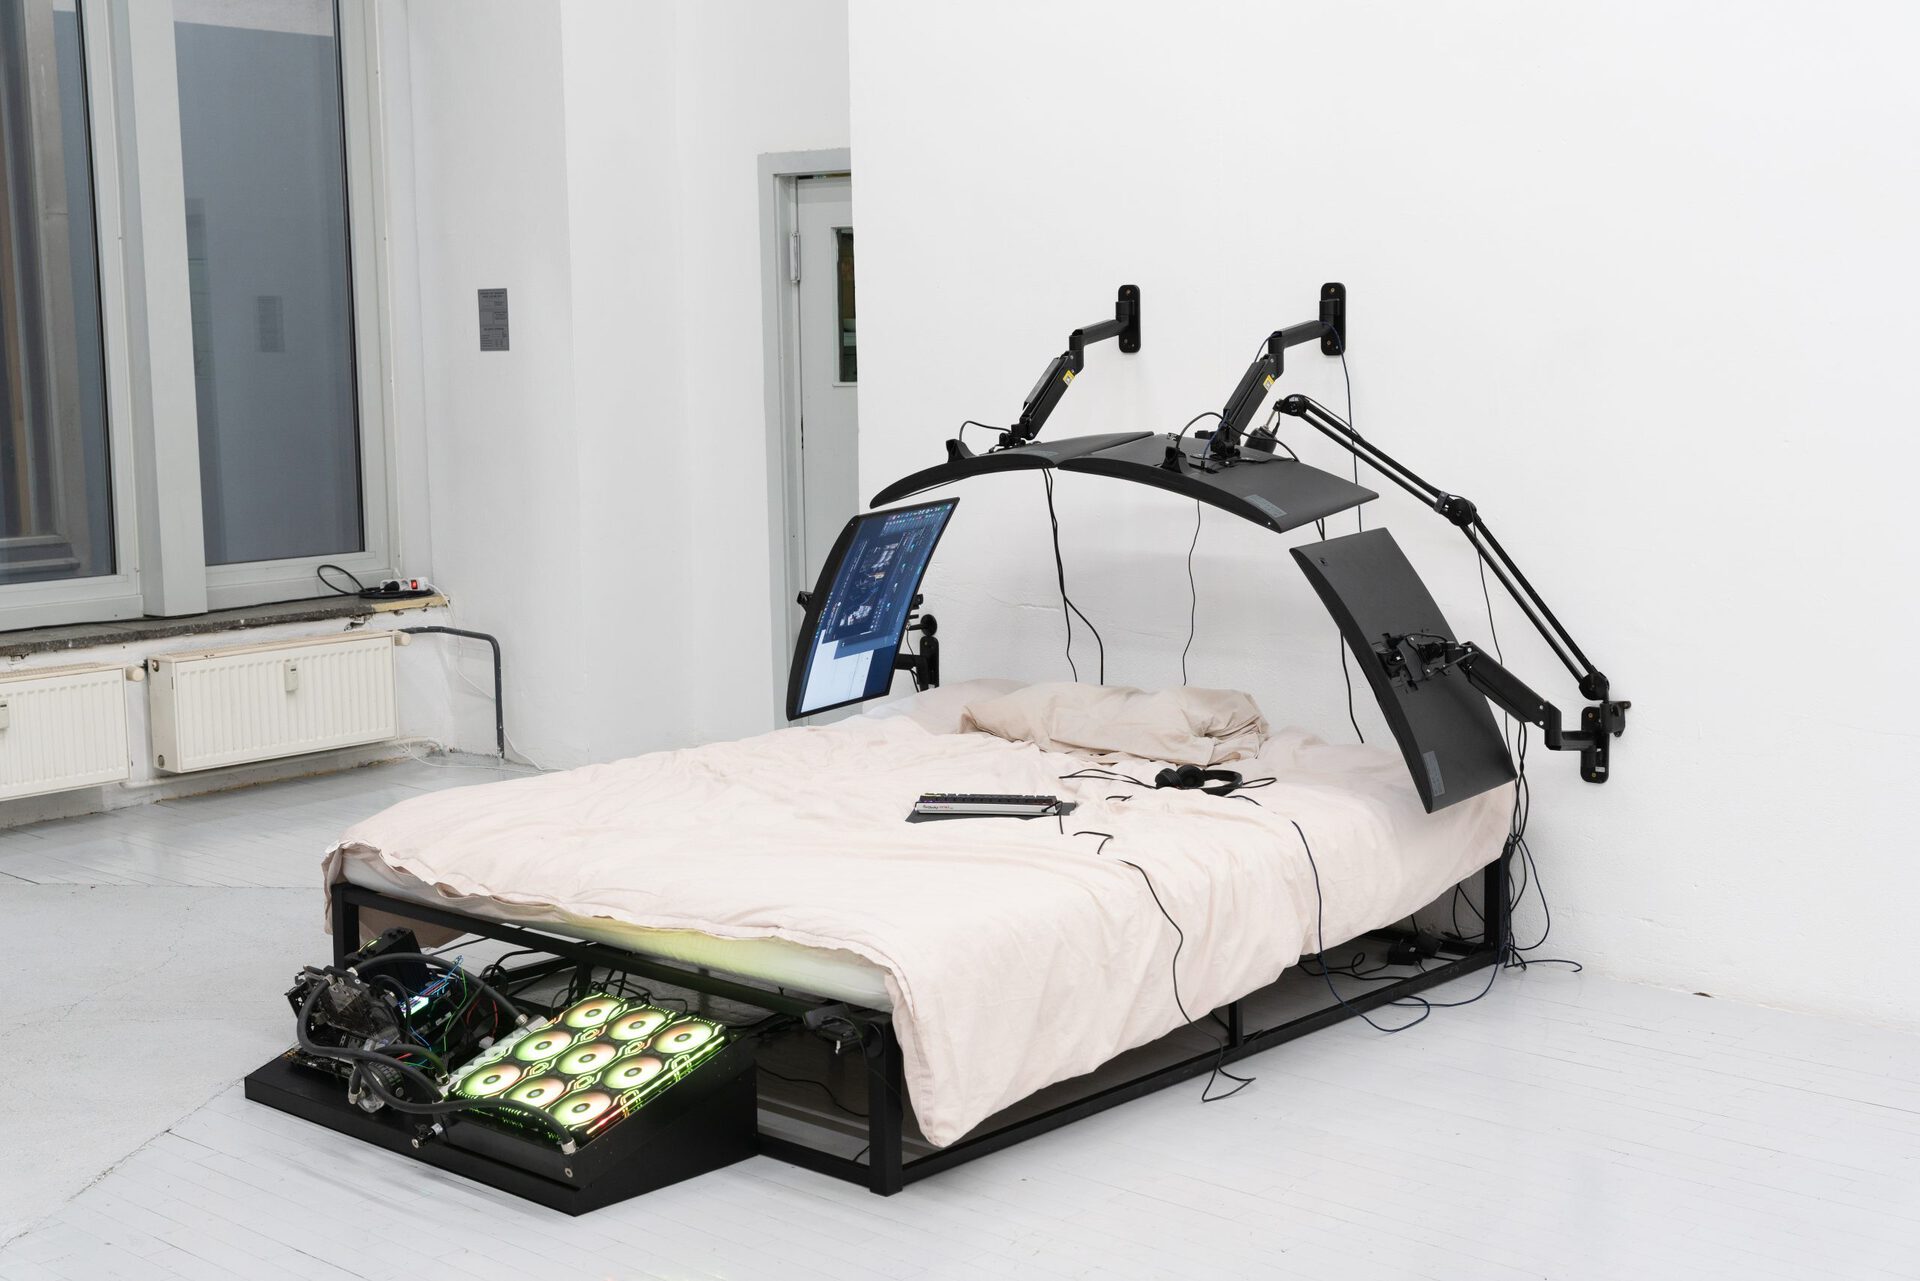 Filip Kostic, Bed PC, 2021, Custom built water cooled computer built into the frame of a bed, bed size variable, 4 curved monitors, cables mounted to wall, keyboard, streaming microphone mounted to wall, webcams, gaming mouse, peripheral computer